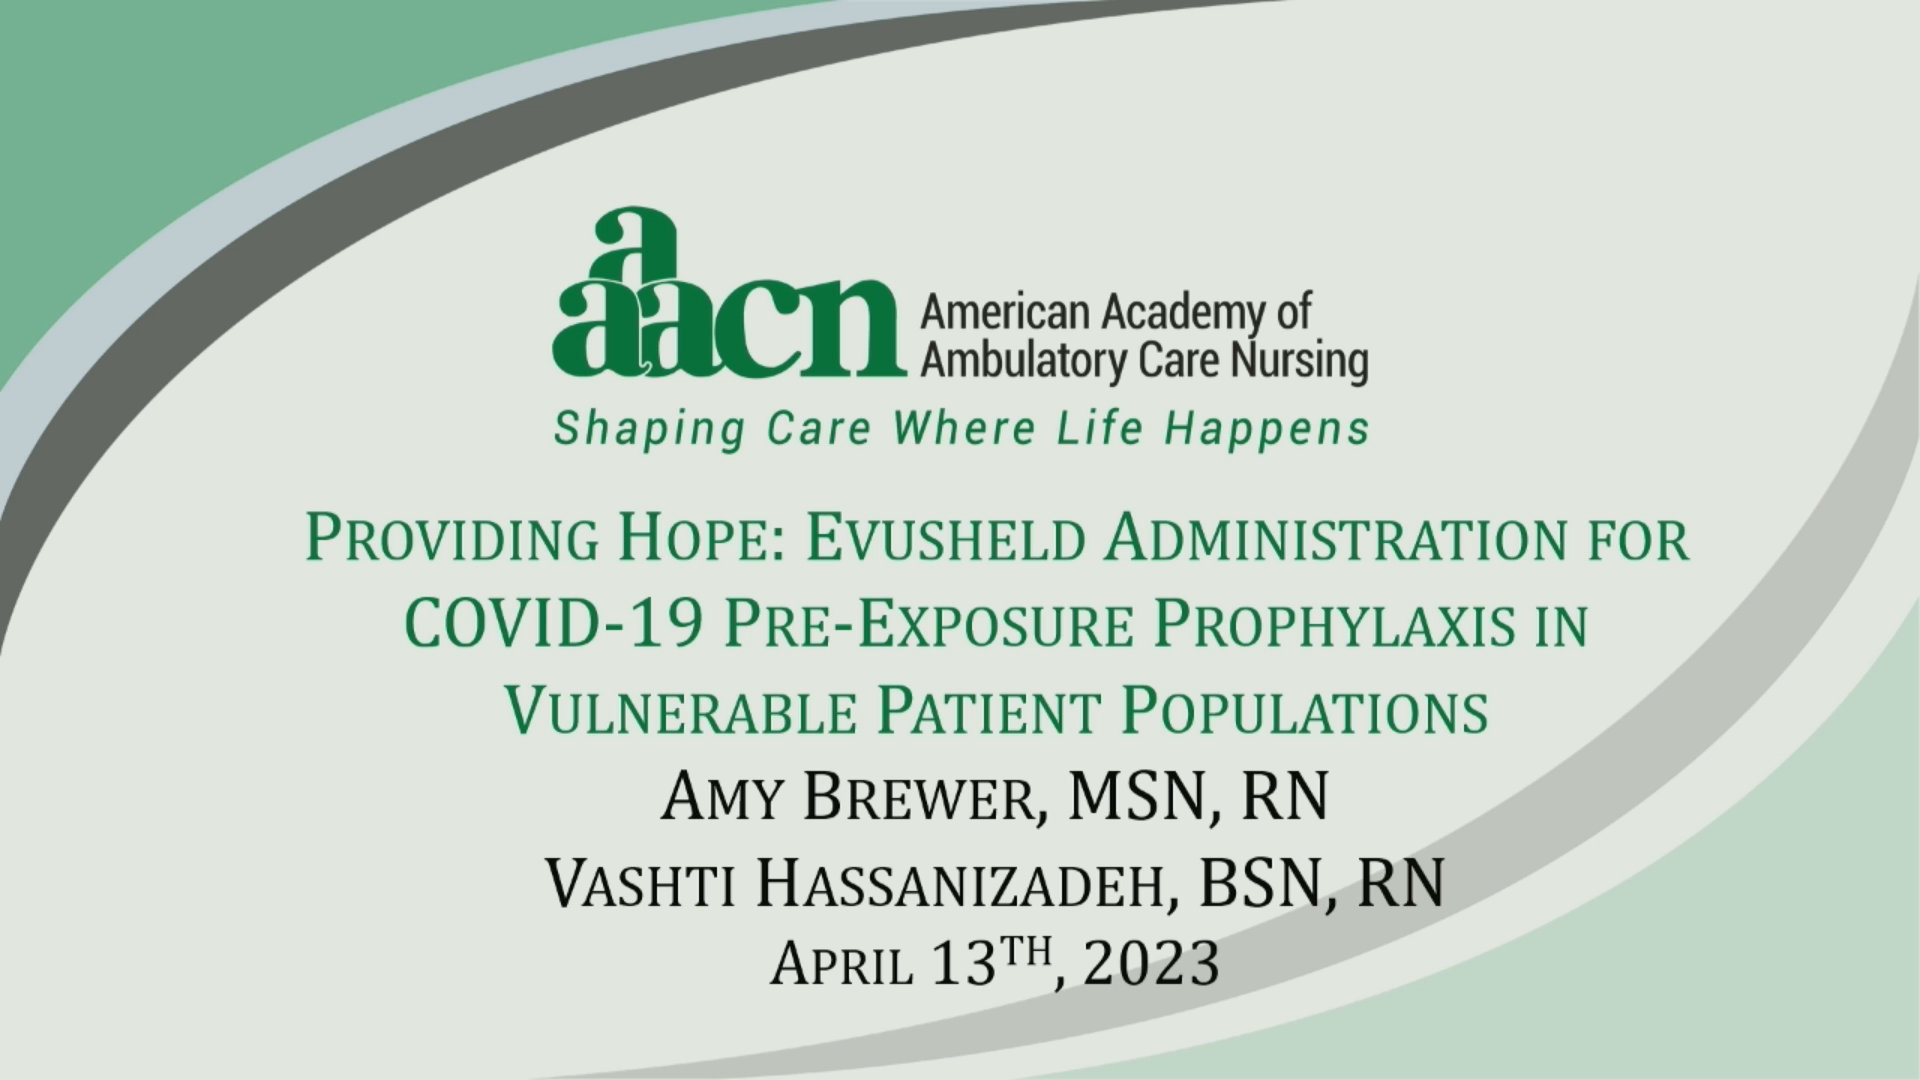 Providing Hope: Evusheld Administration for COVID-19 Pre-Exposure Prophylaxis in Vulnerable Patient Populations